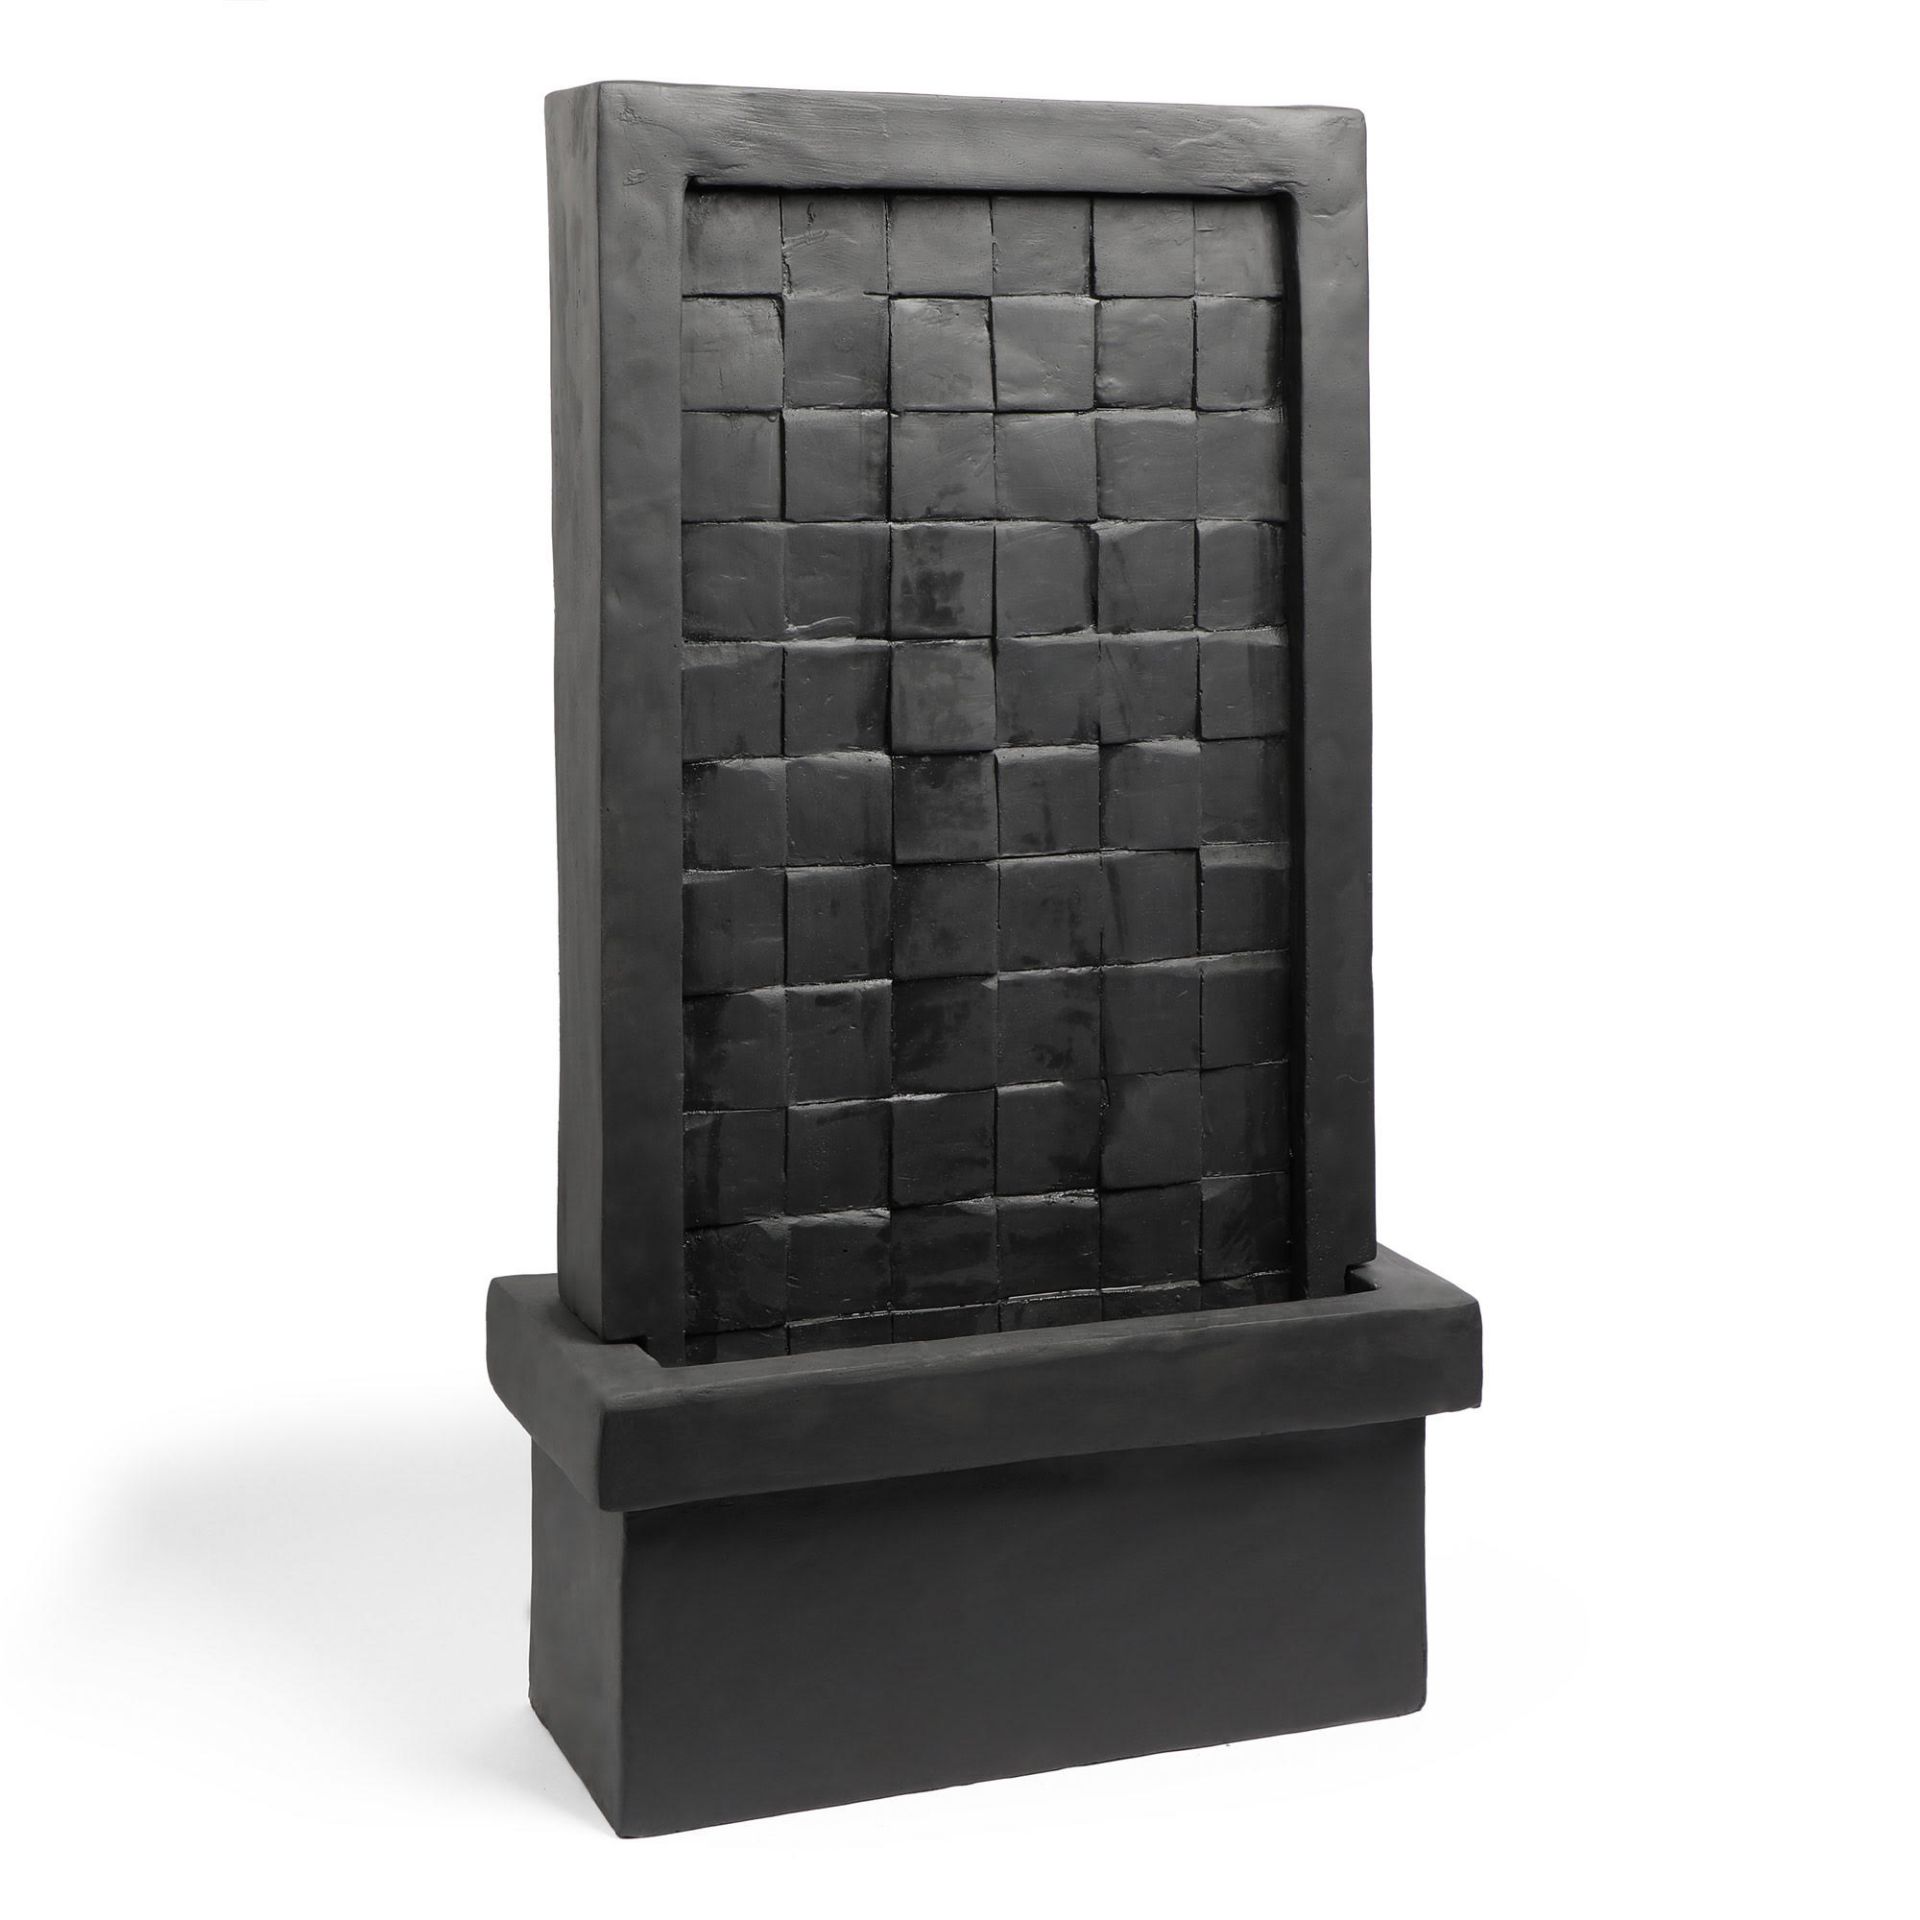 New & Boxed Tiled Waterfall Water Feature - Tall LED Wall Lit Cascading Water Fountain. RRP £349.99. - Image 5 of 6